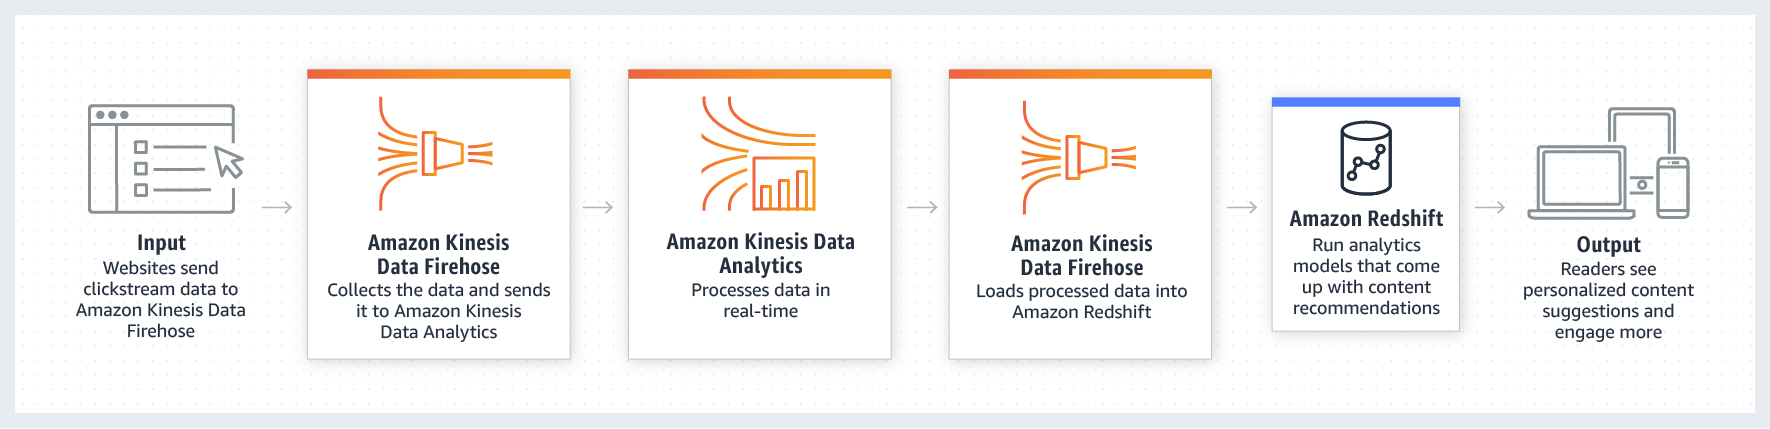 product-page-diagram_Amazon-Kinesis_Evolve-from-batch-to-real-time-Analytics